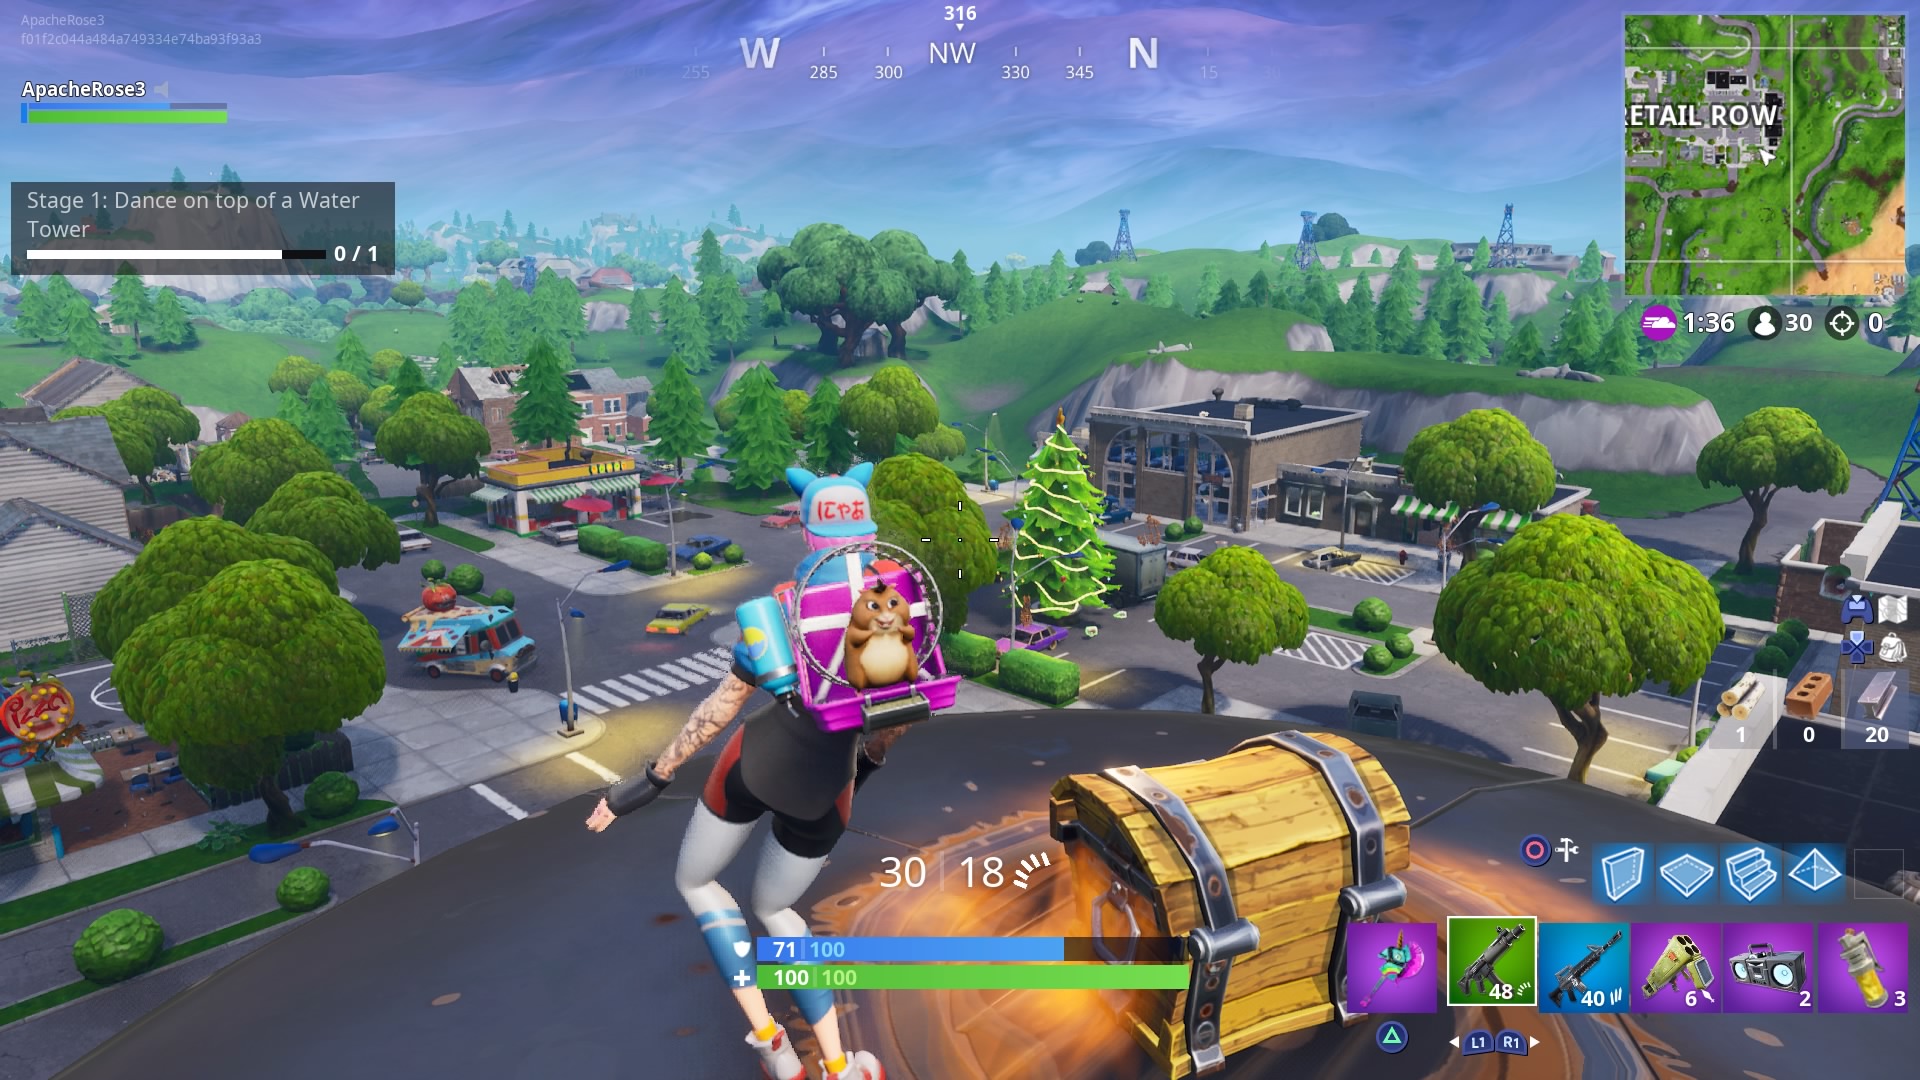 Where To Dance On Top Of A Water Tower Ranger Tower And Air Traffic - where to dance on top of a water tower ranger tower and air traffic control tower in fortnite season 7 week 5 challenges gamesradar